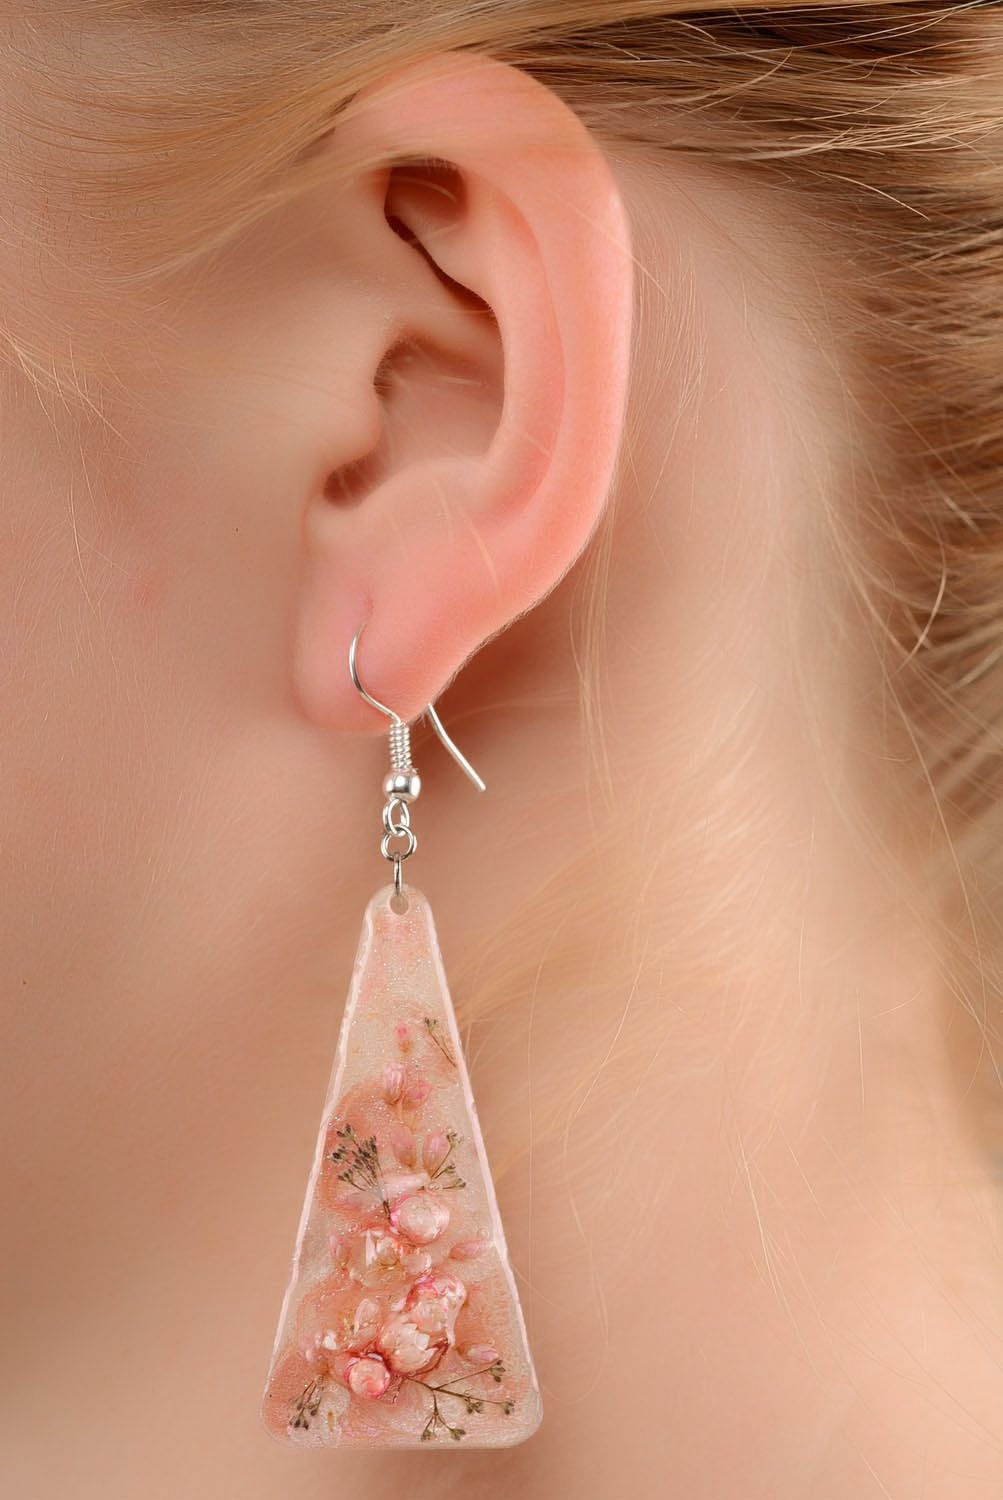 Earrings made of flowers and epoxy resin photo 3